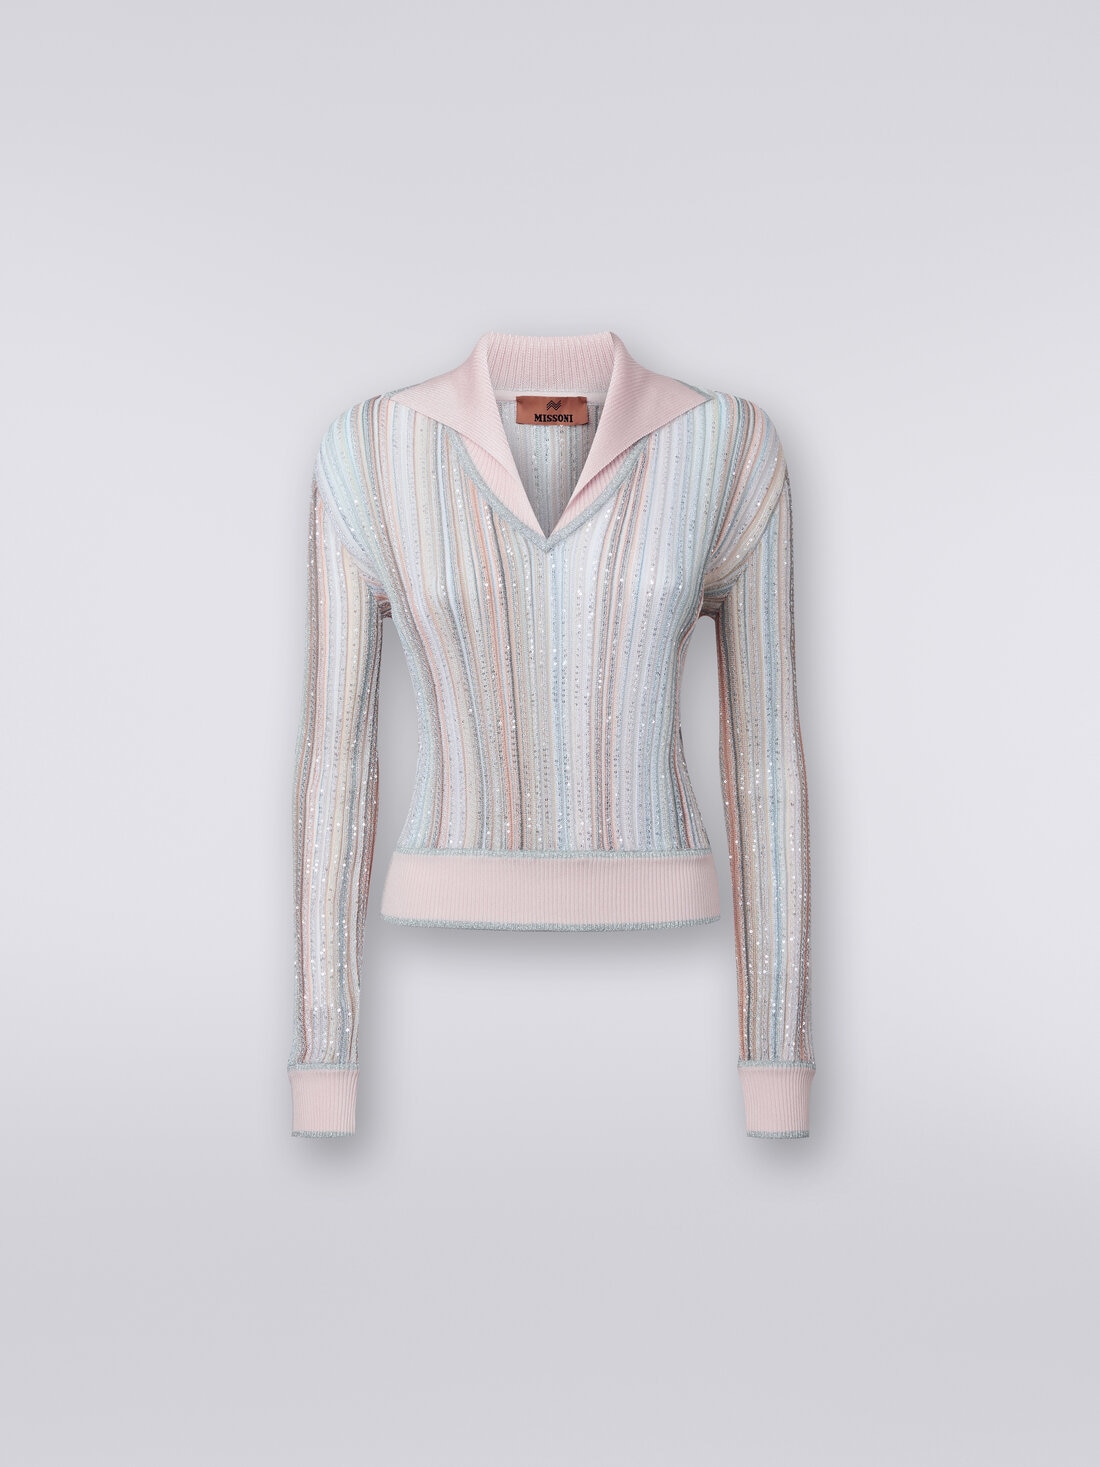 Long-sleeved vertical striped top with sequins, Multicoloured  - DS24SN05BK033MSM9AH - 0